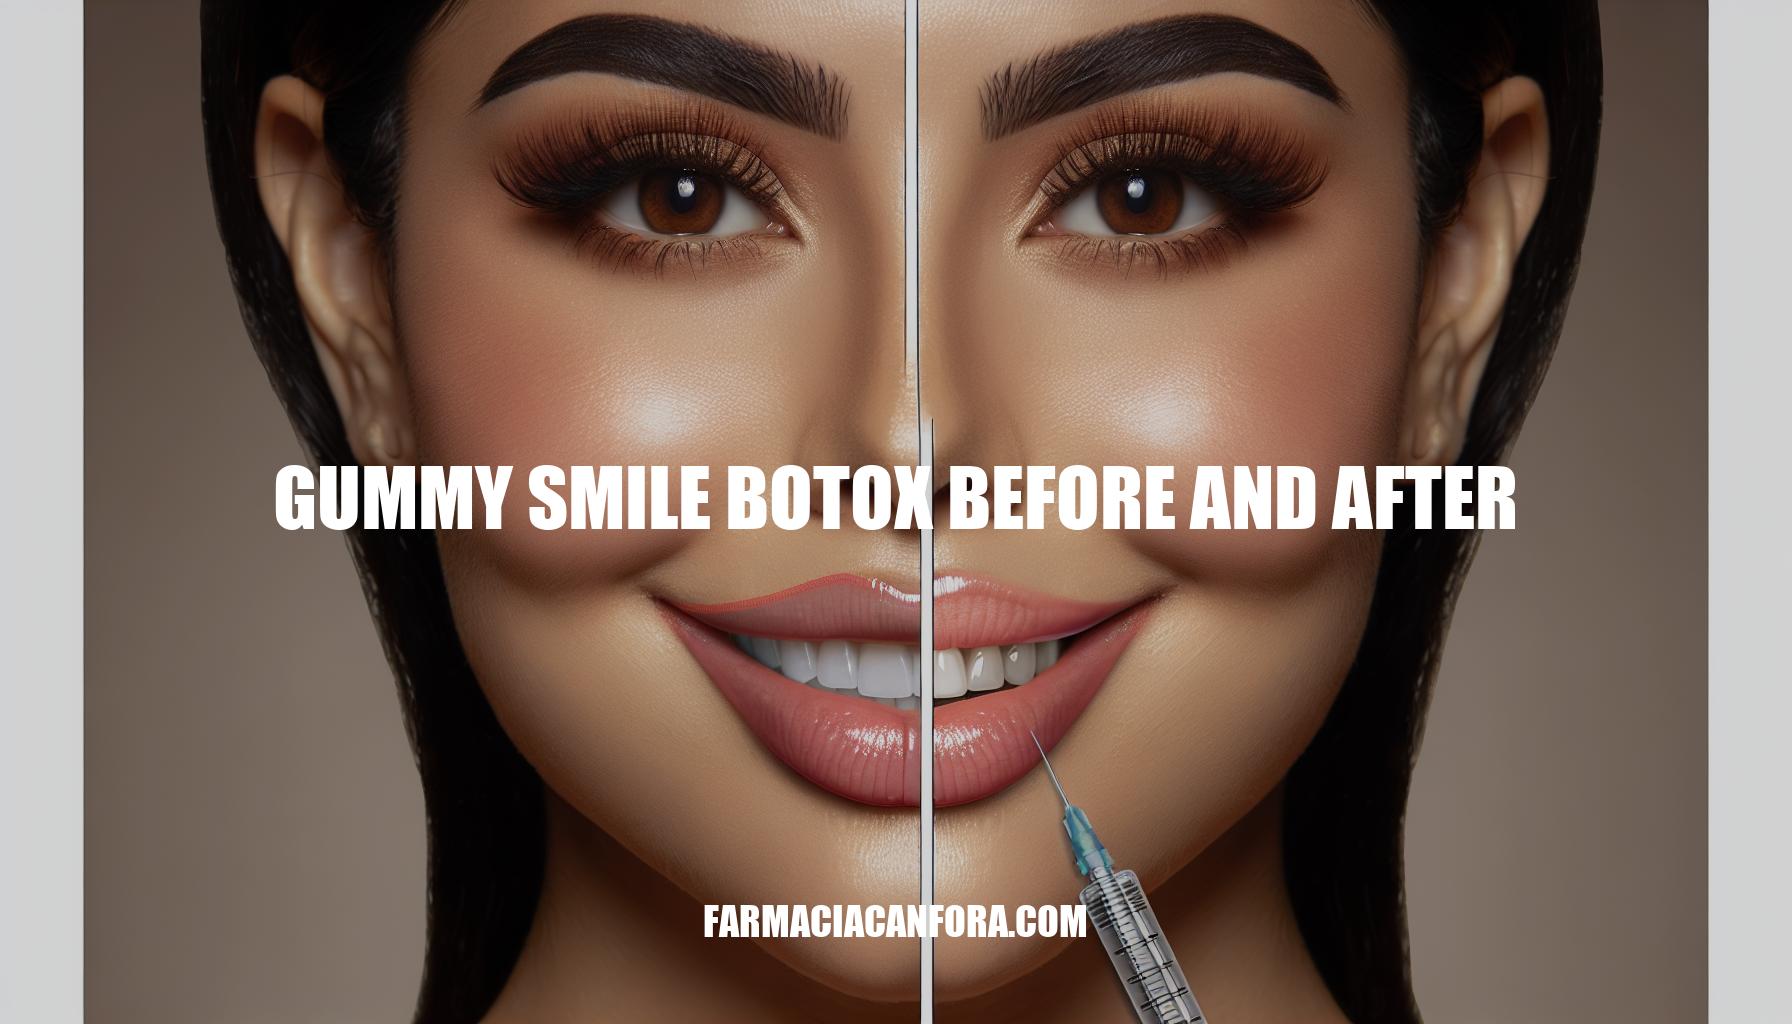 Gummy Smile Botox Before and After: Complete Guide